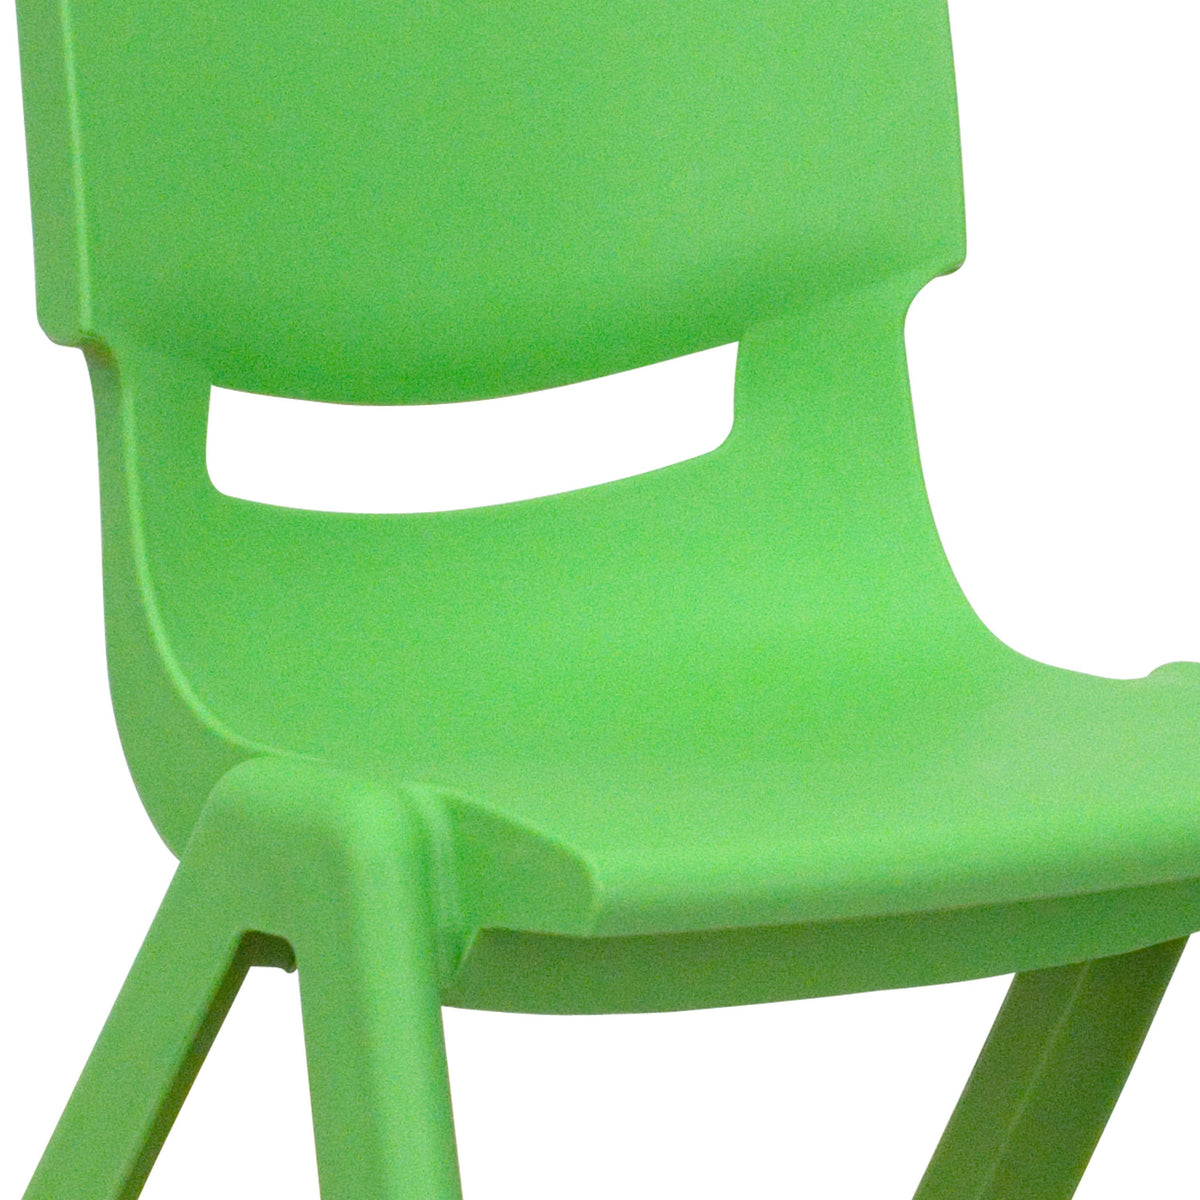 Green |#| 4 Pack Green Plastic Stackable School Chair with 10.5inchH Seat, Preschool Chair